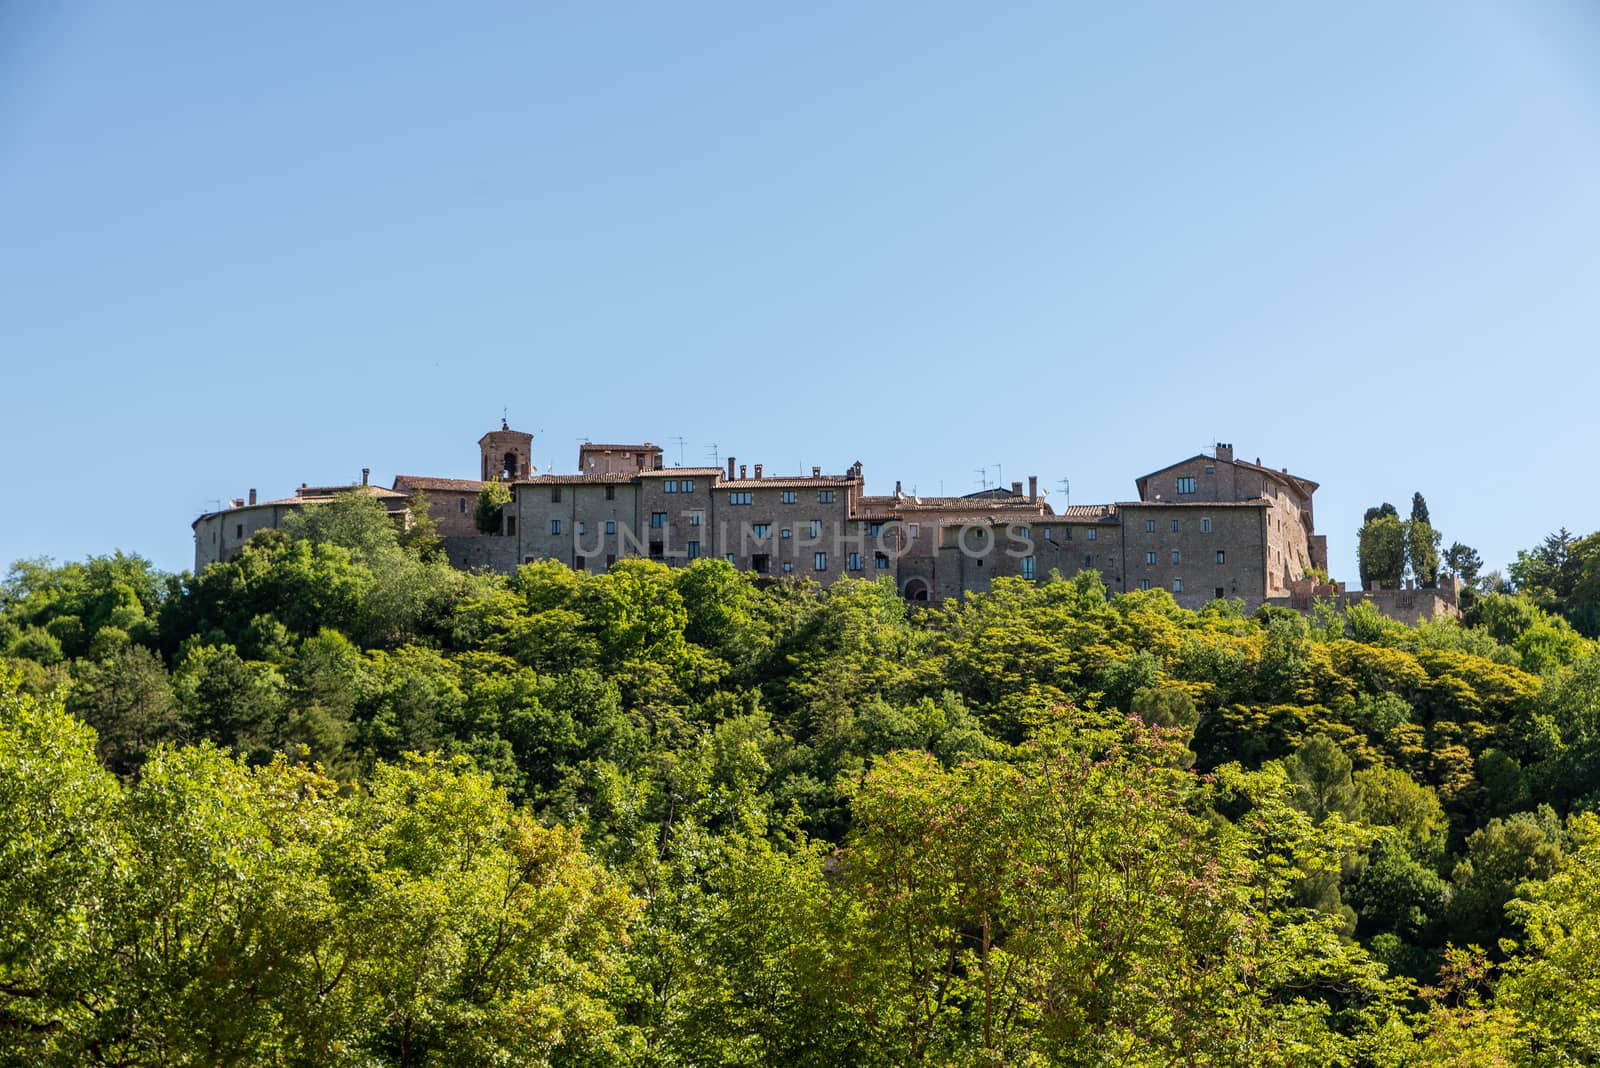 ancient village of Macerino on a hill in the province of terni